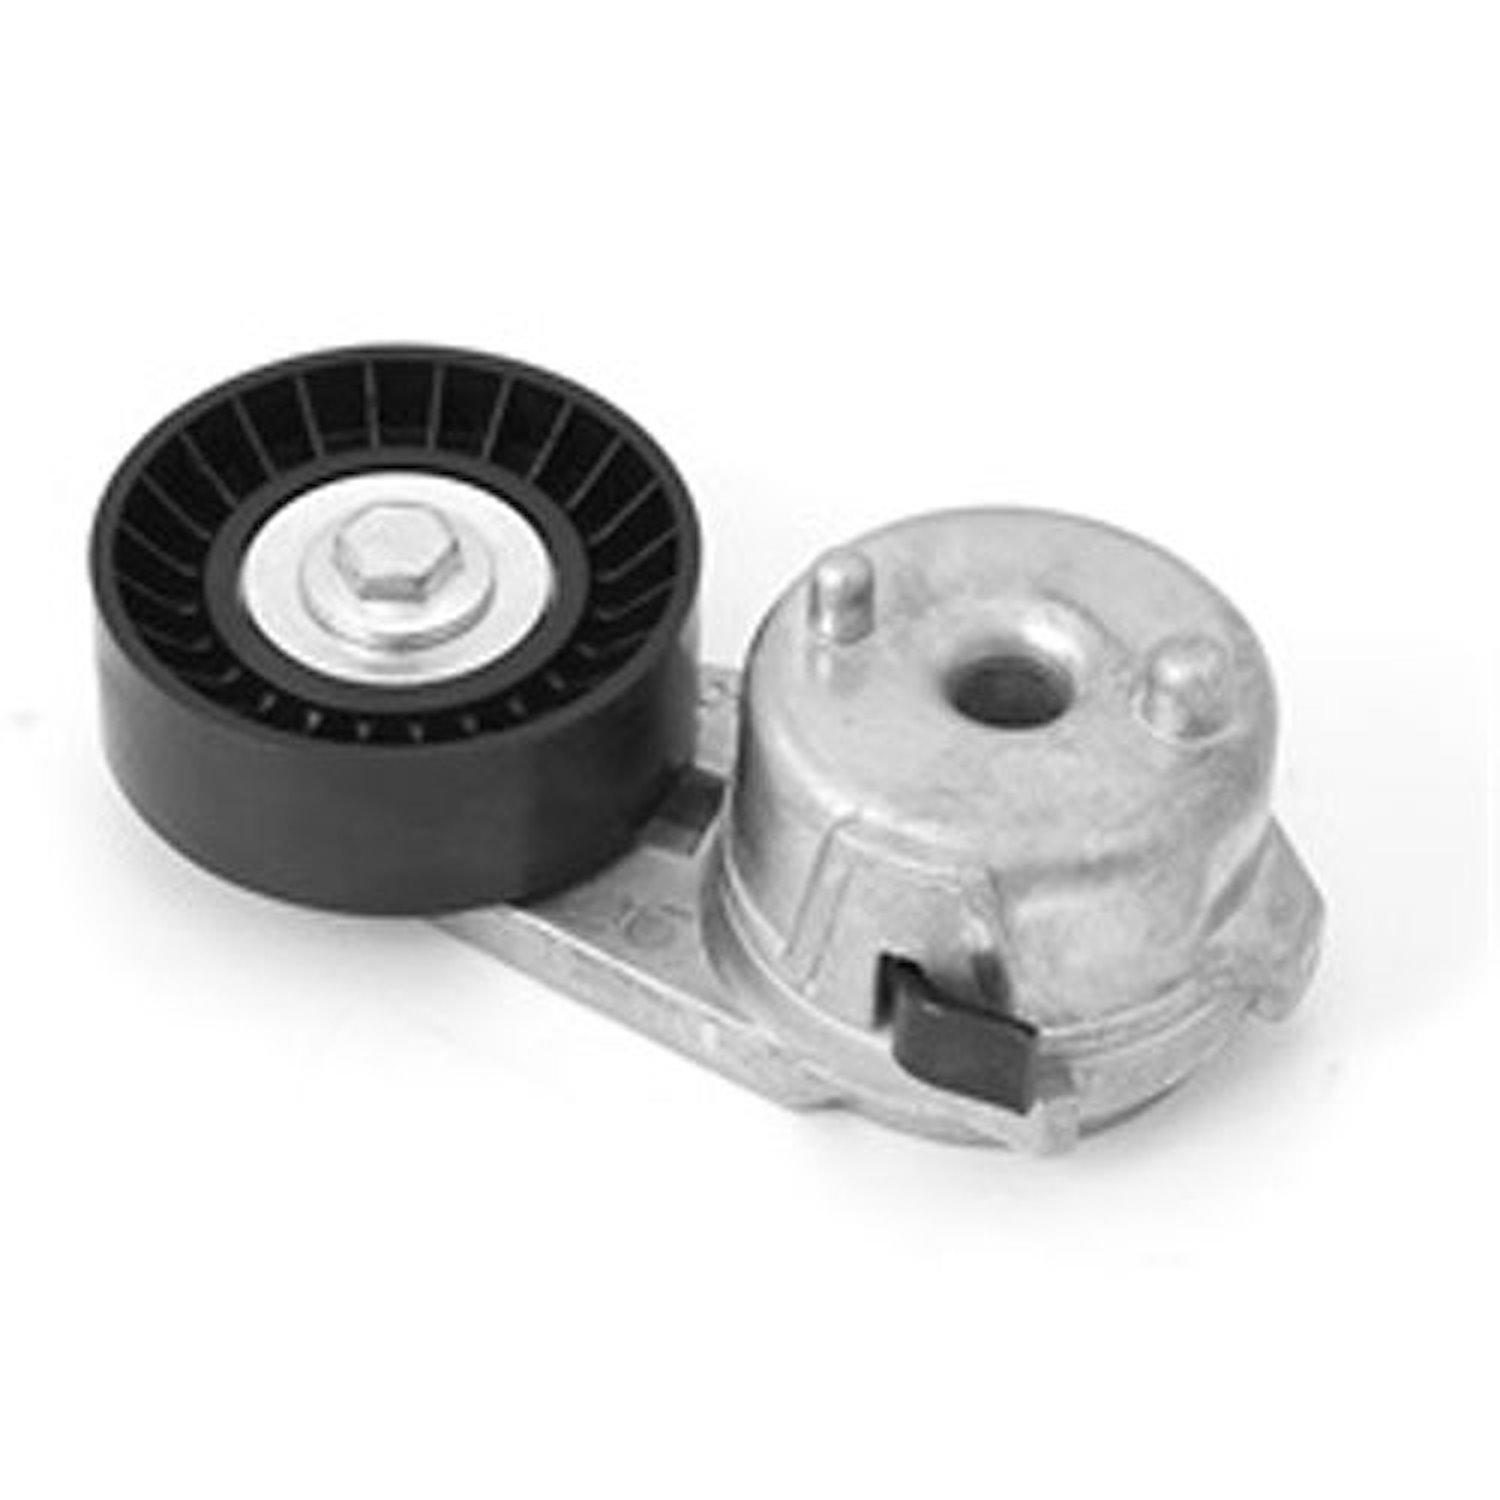 Replacement serpentine belt tensioner from Omix-ADA, Fits 07-11